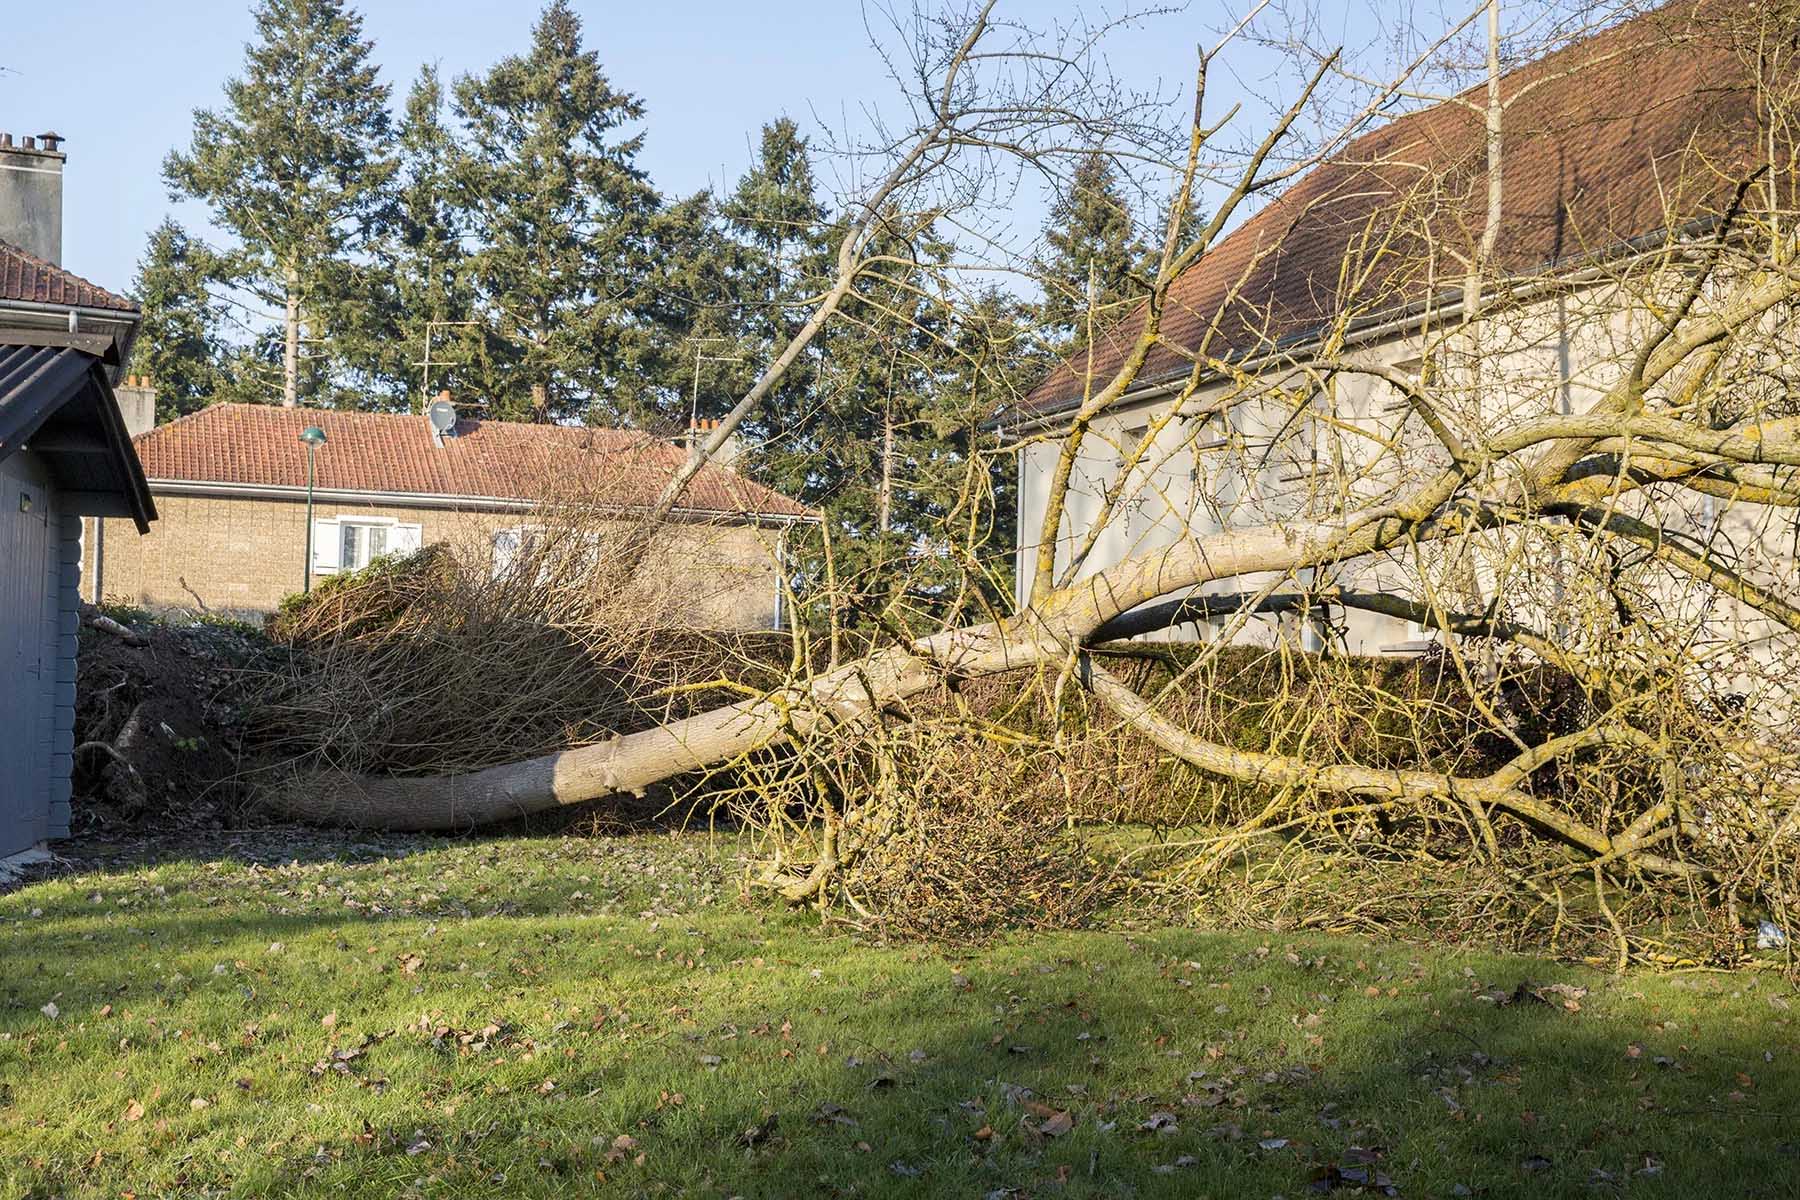 A tree has fallen in the backyard of someone's house, causing loads of damage.